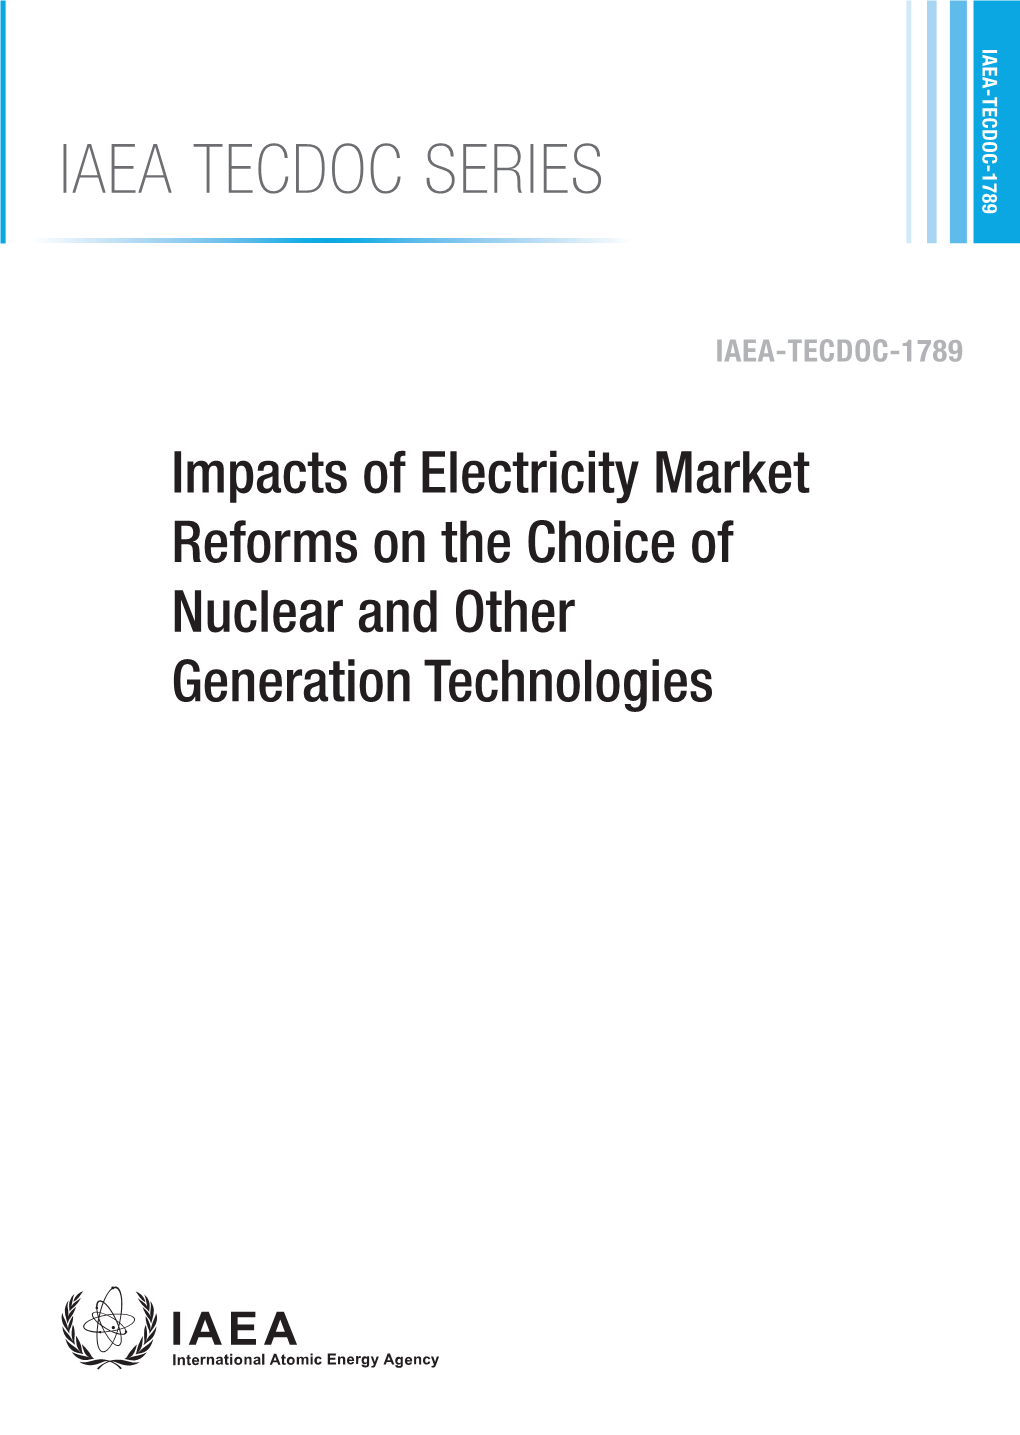 IAEA TECDOC SERIES Impacts of Electricity Market Reforms on the Choice Nuclear and Other Generation Technologies